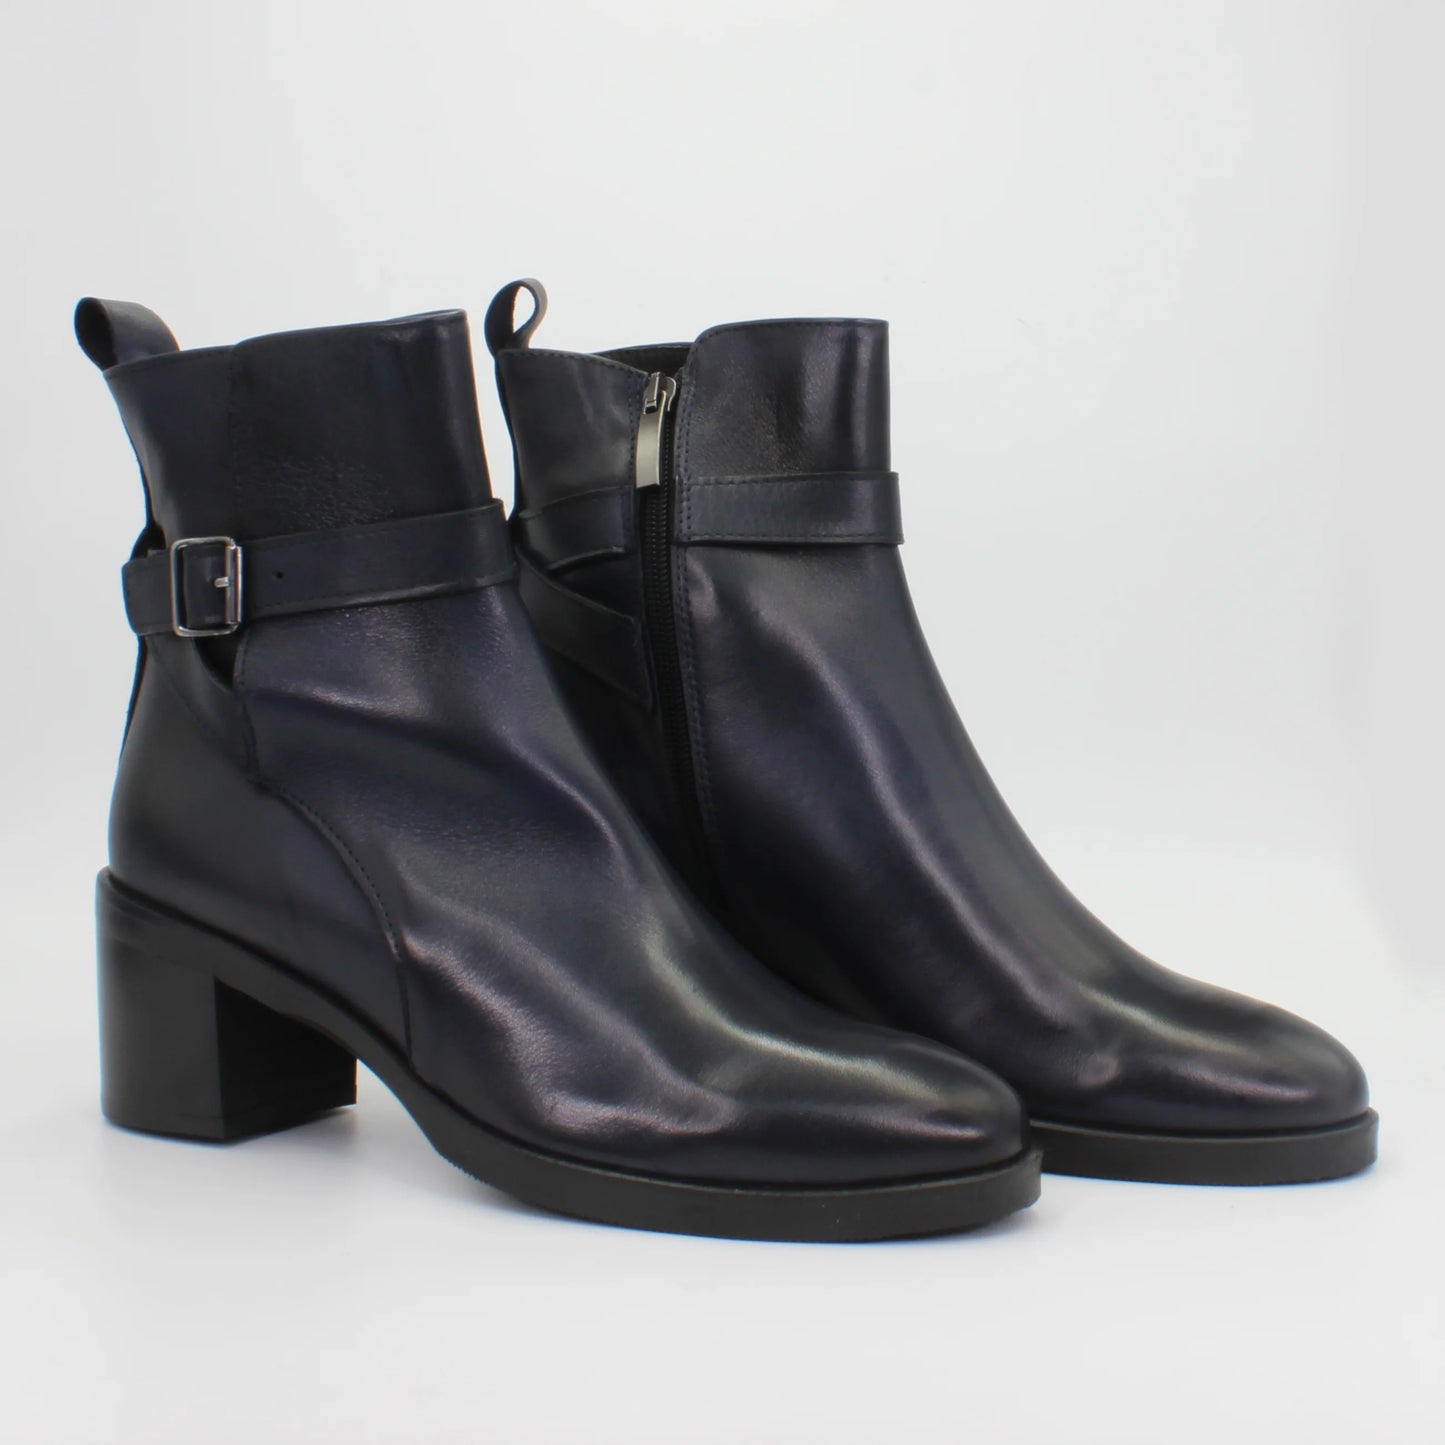 Shop Handmade Italian Leather Boot in Blue (GC2560) or browse our range of hand-made Italian boots for women in leather or suede in-store at Aliverti Cape Town, or shop online. We deliver in South Africa & offer multiple payment plans as well as accept multiple safe & secure payment methods.